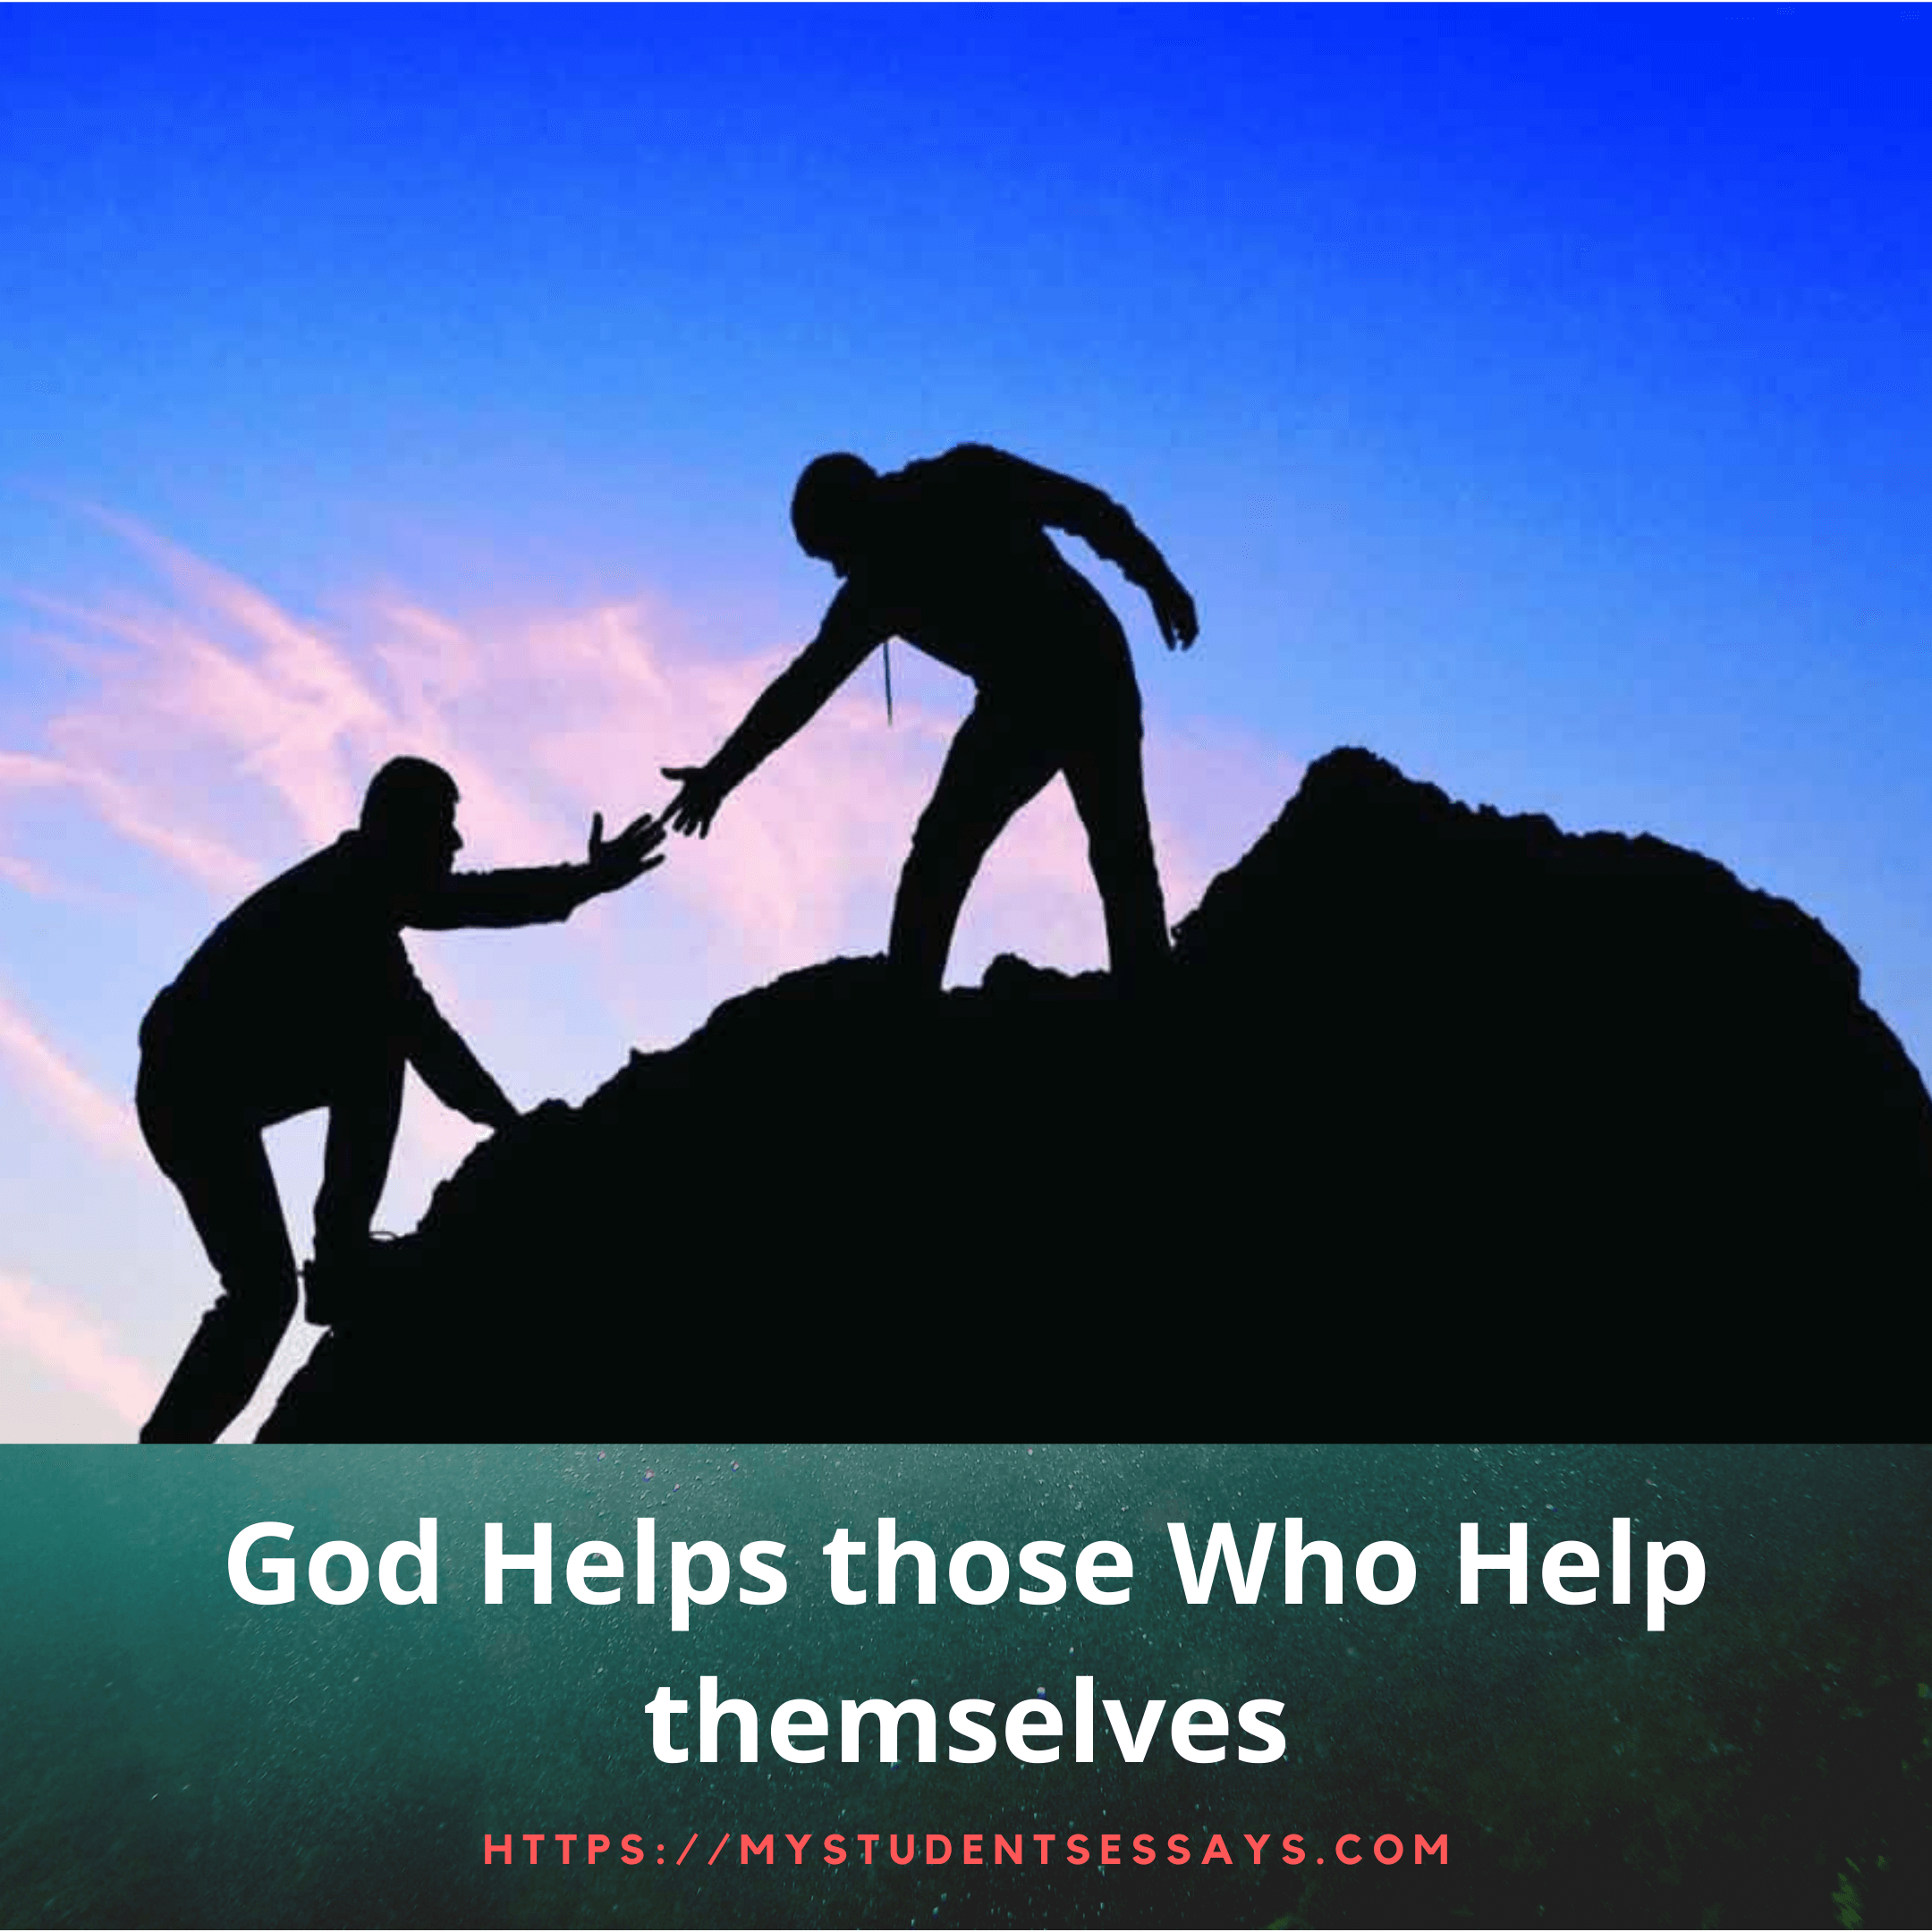 Essay on God helps those who help themselves [ Meaning & Explanation ]